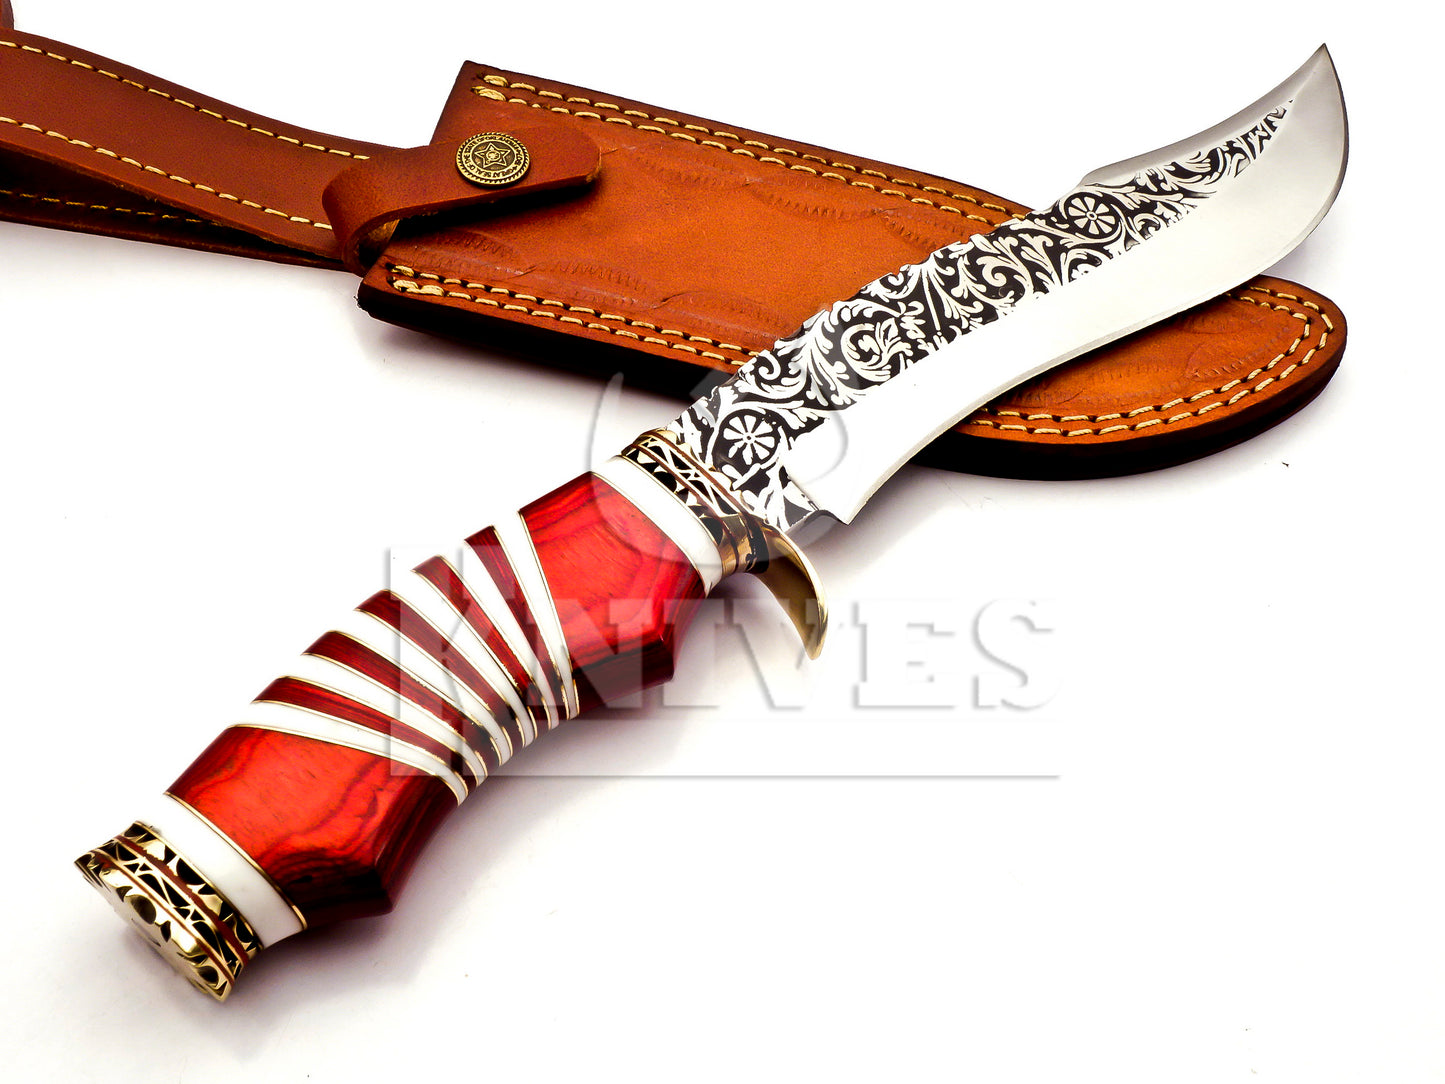 J2 Steel Collectible Bowie Knife with Red Pakka Wood